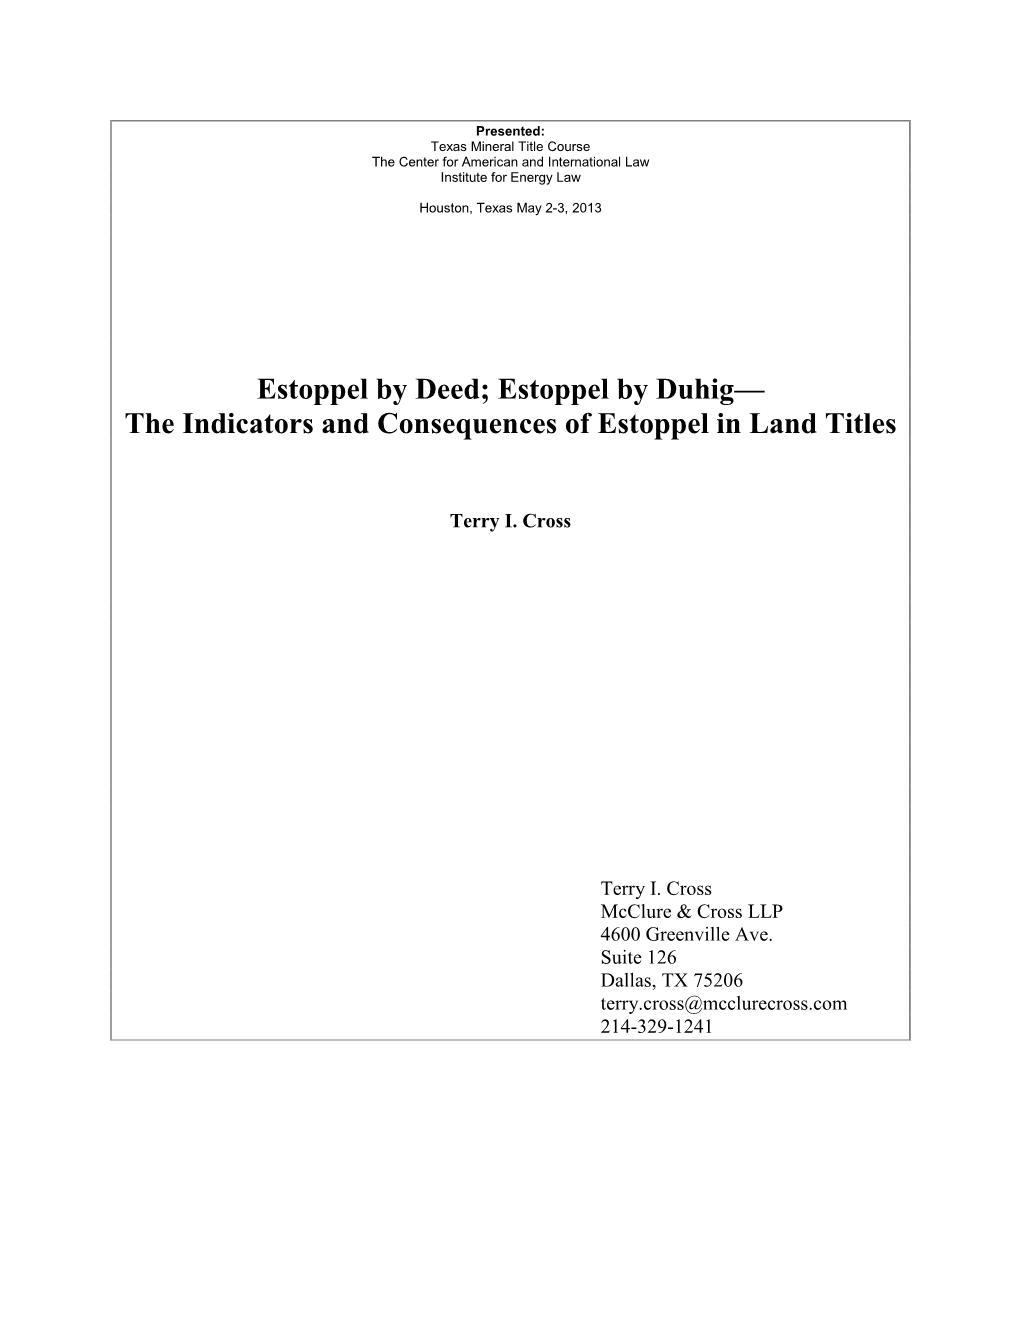 Estoppel by Deed; Estoppel by Duhig— the Indicators and Consequences of Estoppel in Land Titles